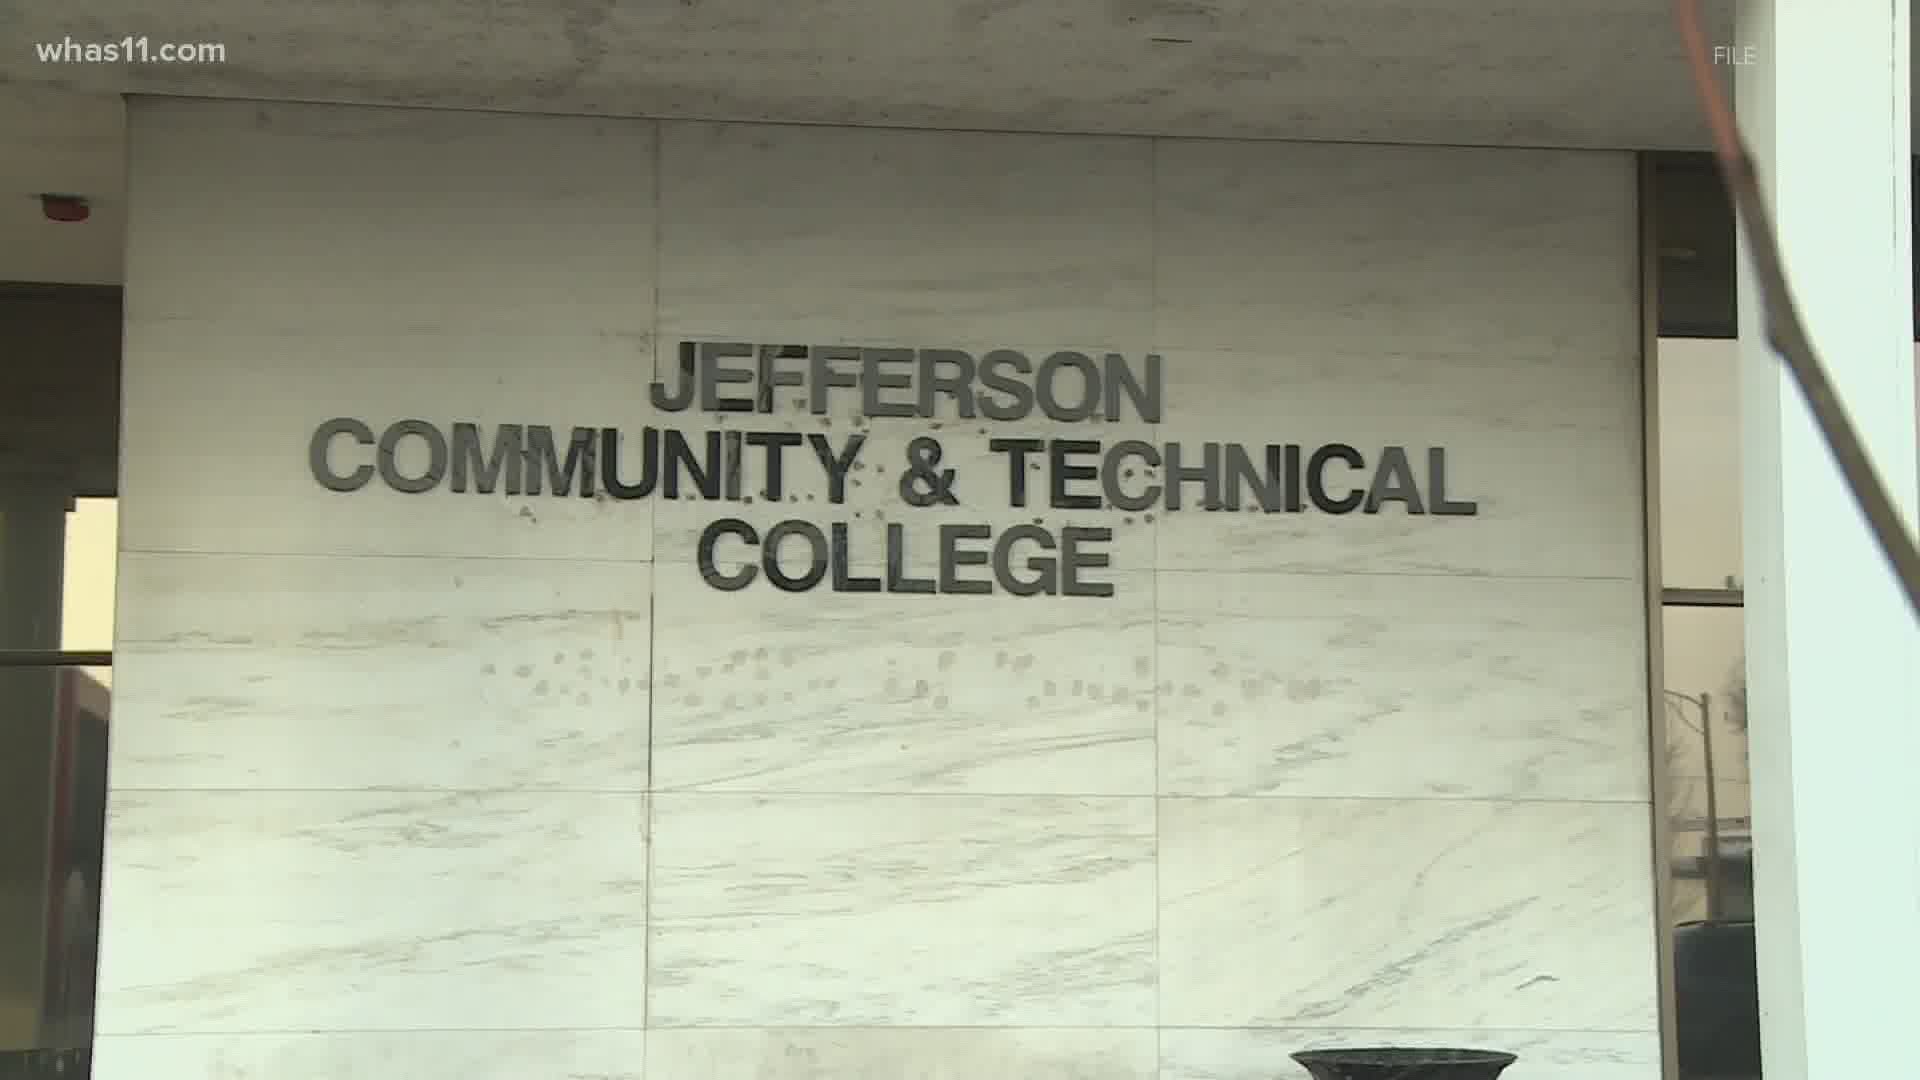 The "Jefferson 2 Bellarmine" collaboration is an affordable college transfer option that allows J-C-T-C students to easily transfer their credits to Bellarmine... wi